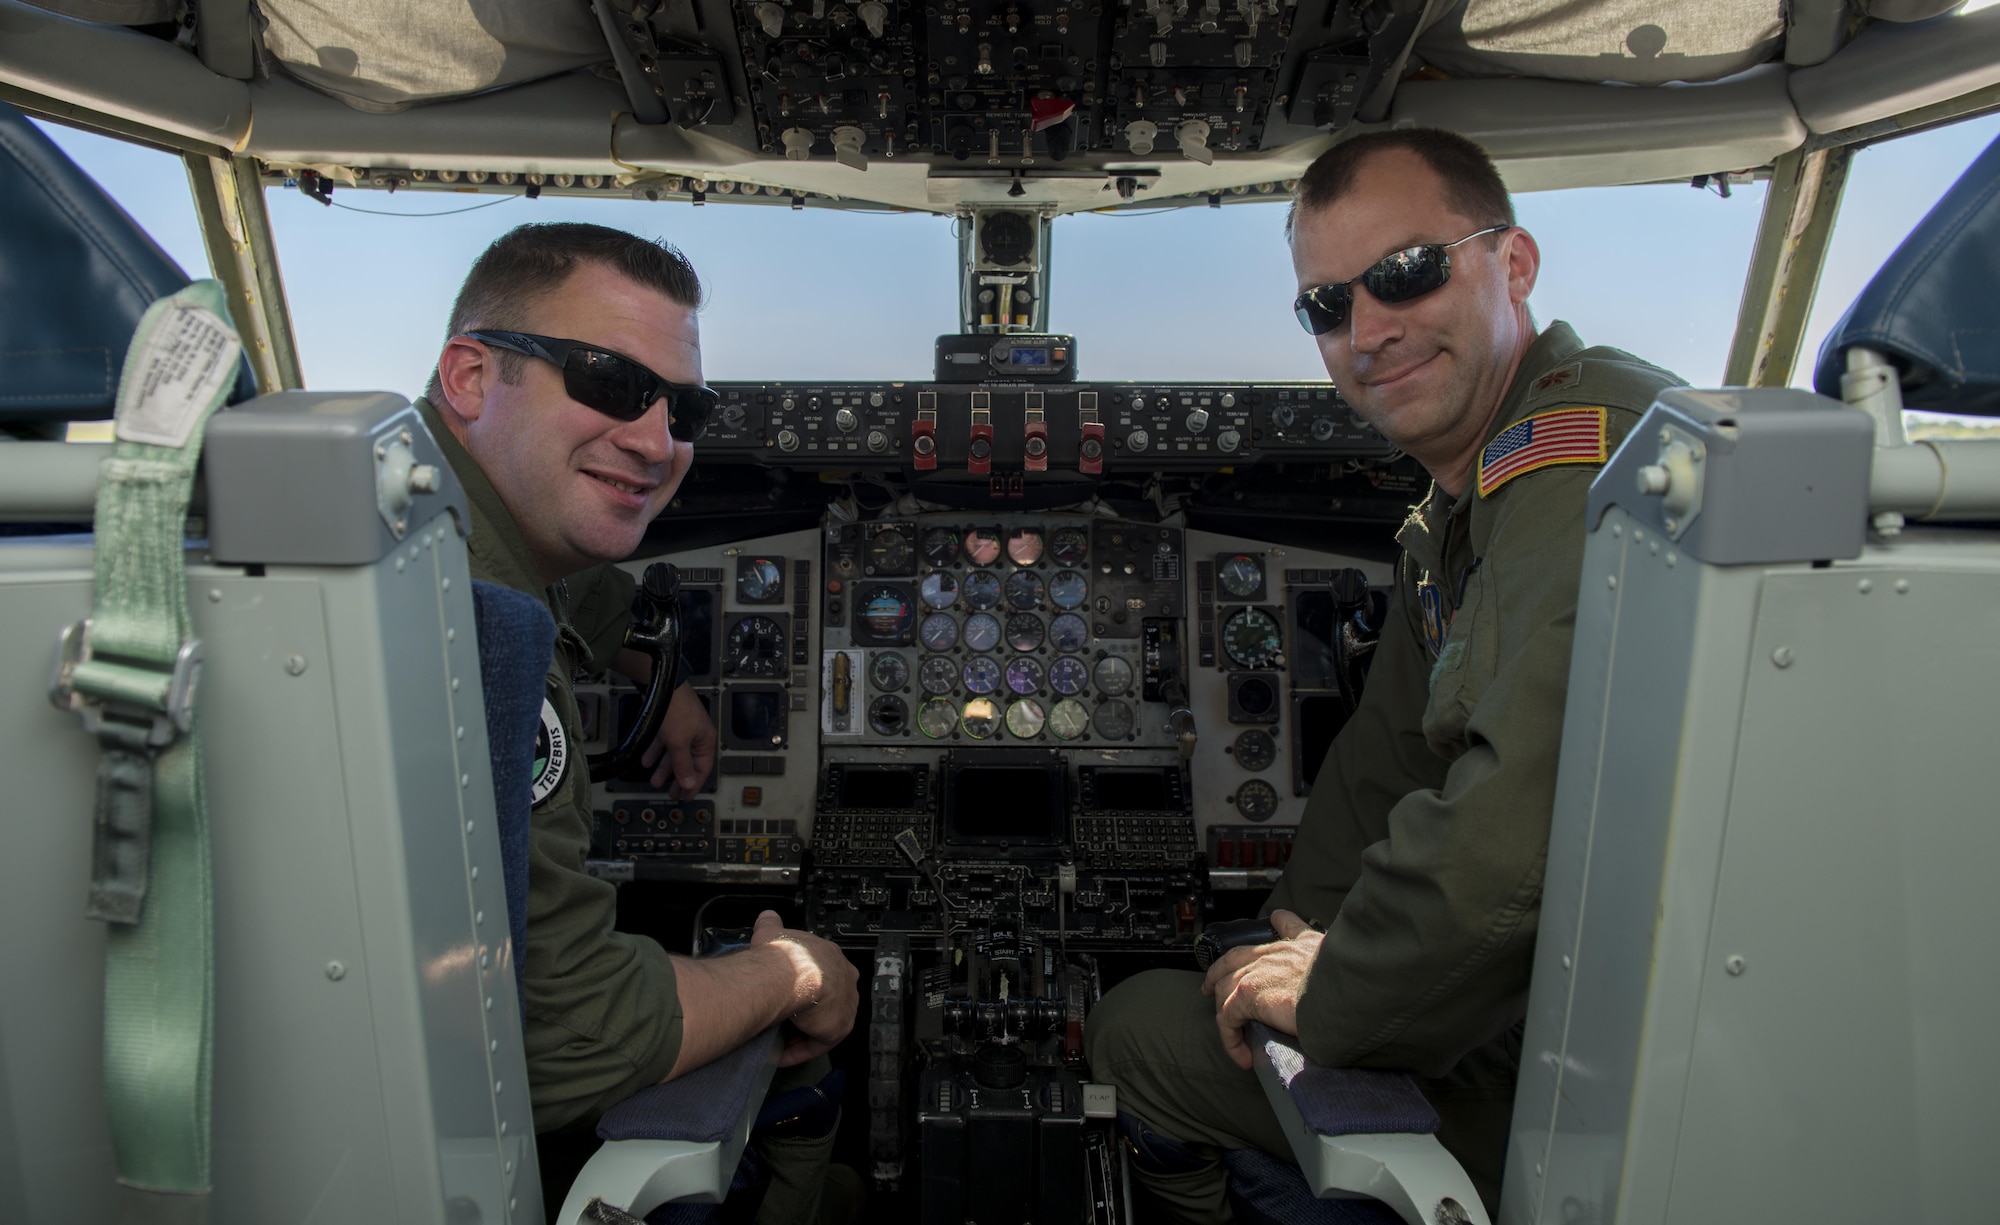 First of 914th ARW pilots earn KC-135 certification